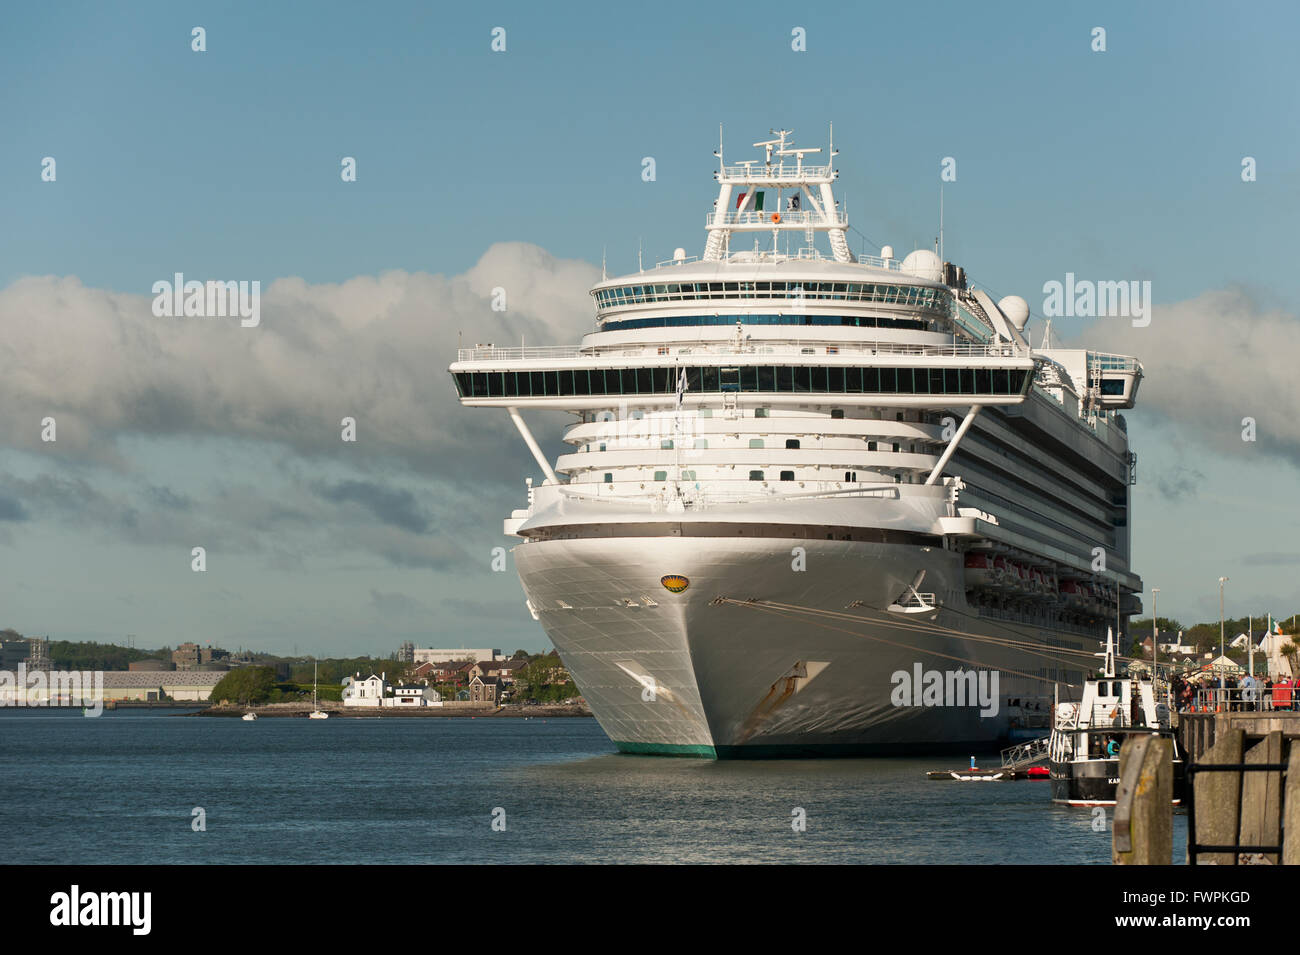 Cruise Liner Ruby Princess moored at Cobh Cruise Terminal, Cork Harbour, County Cork, Ireland. Stock Photo